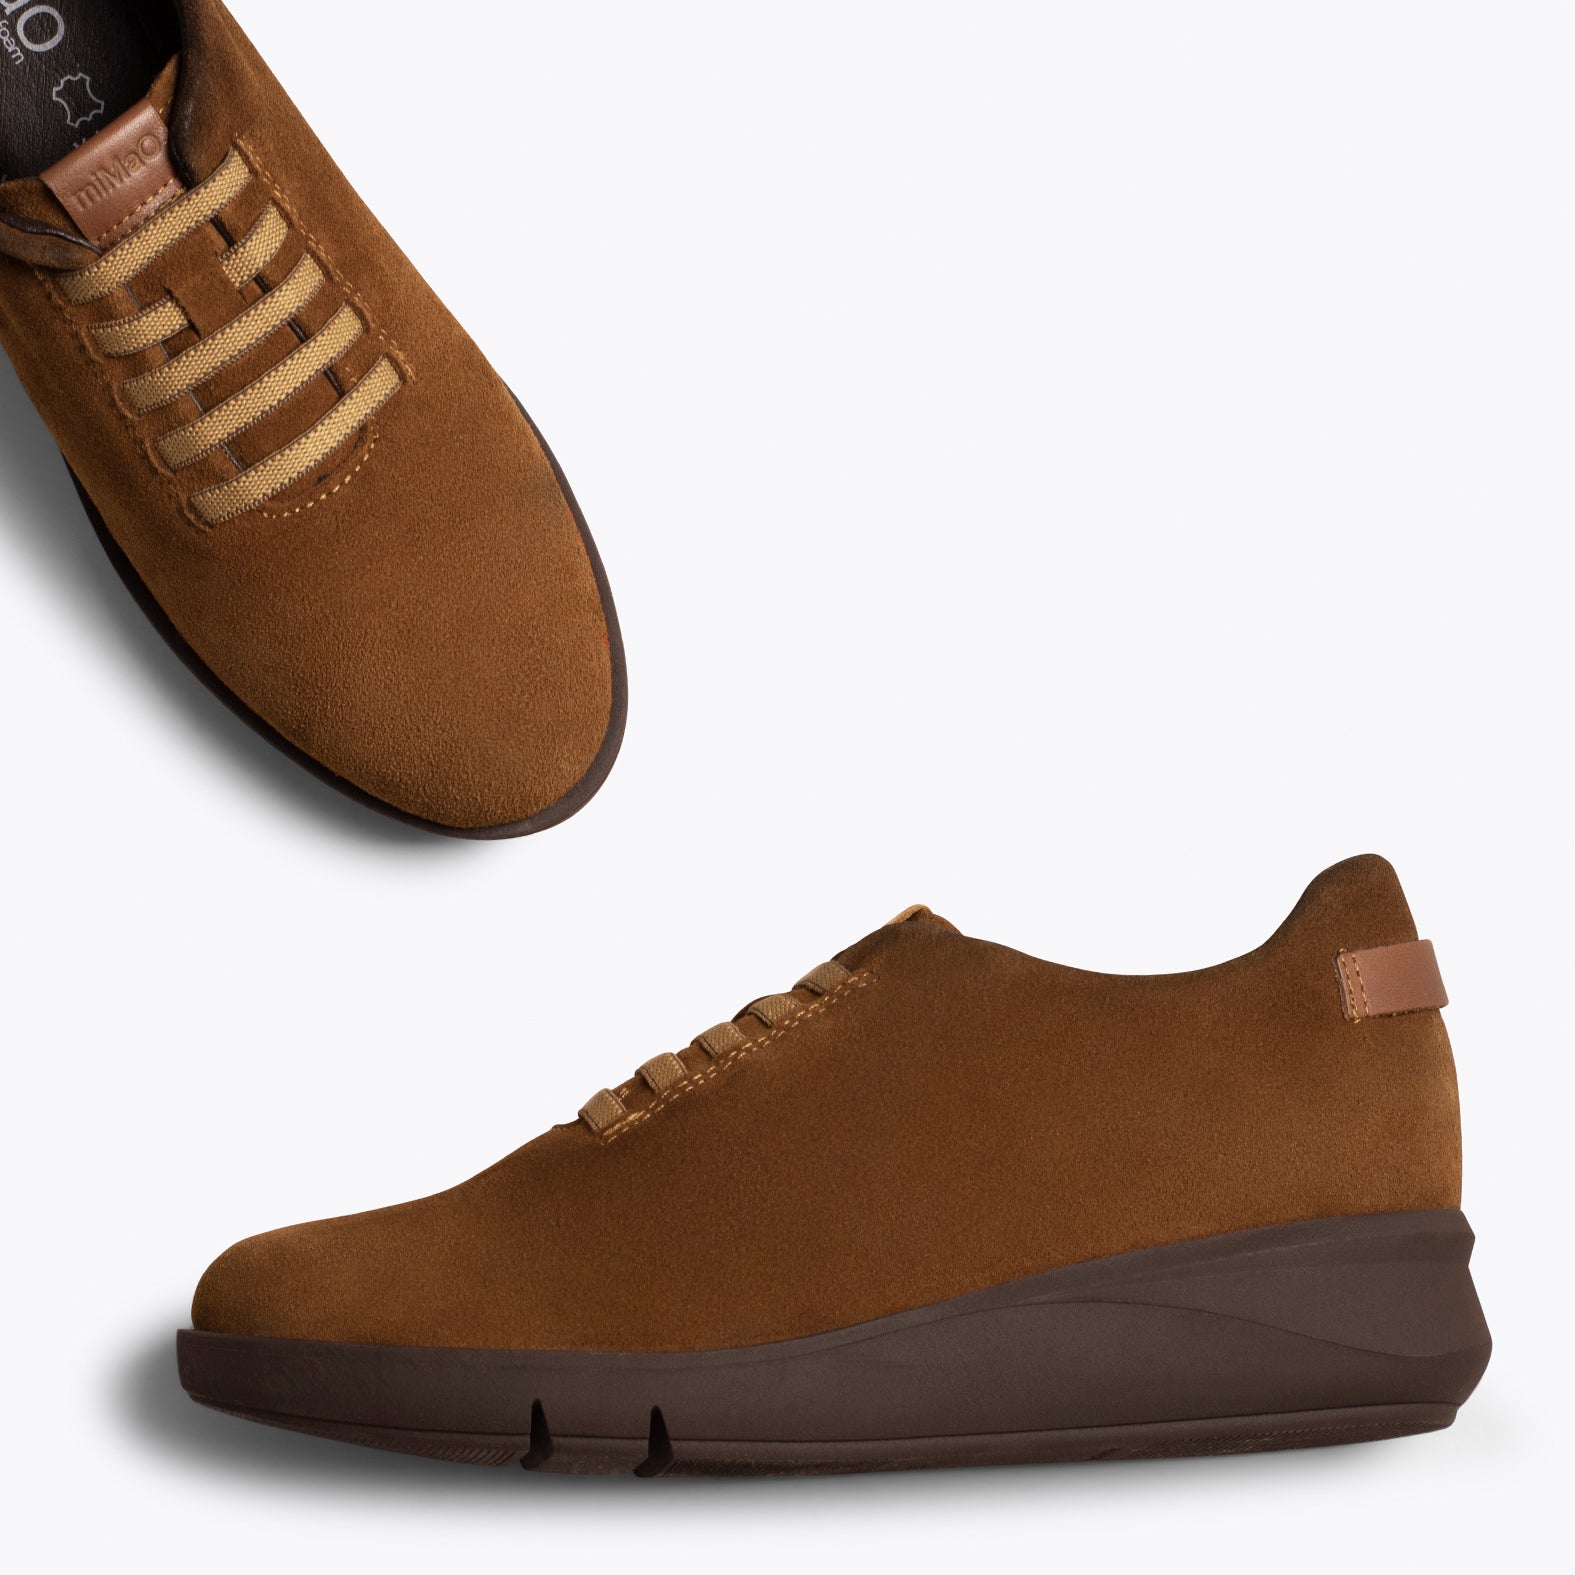 FLY – CAMEL casual sneaker with elastic laces